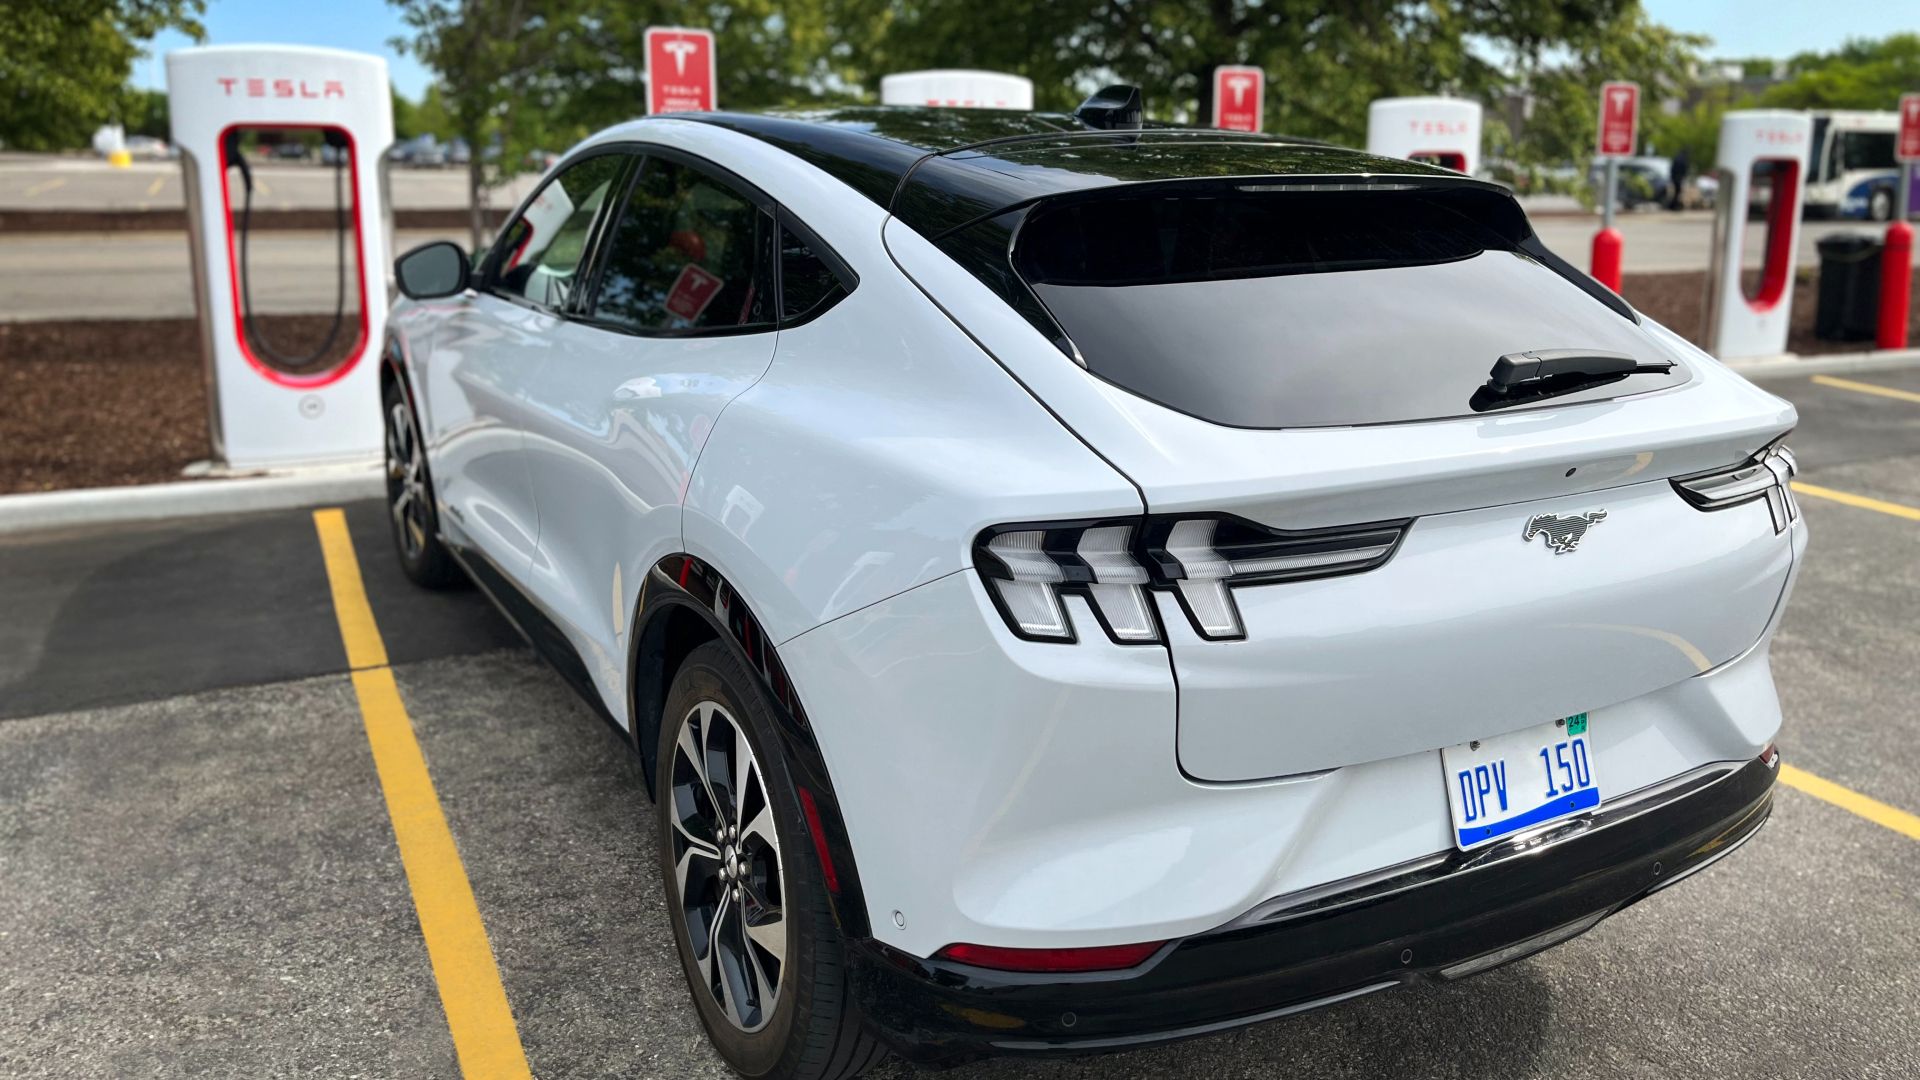 Ford Mustang Mach-E At A Tesla Supercharger